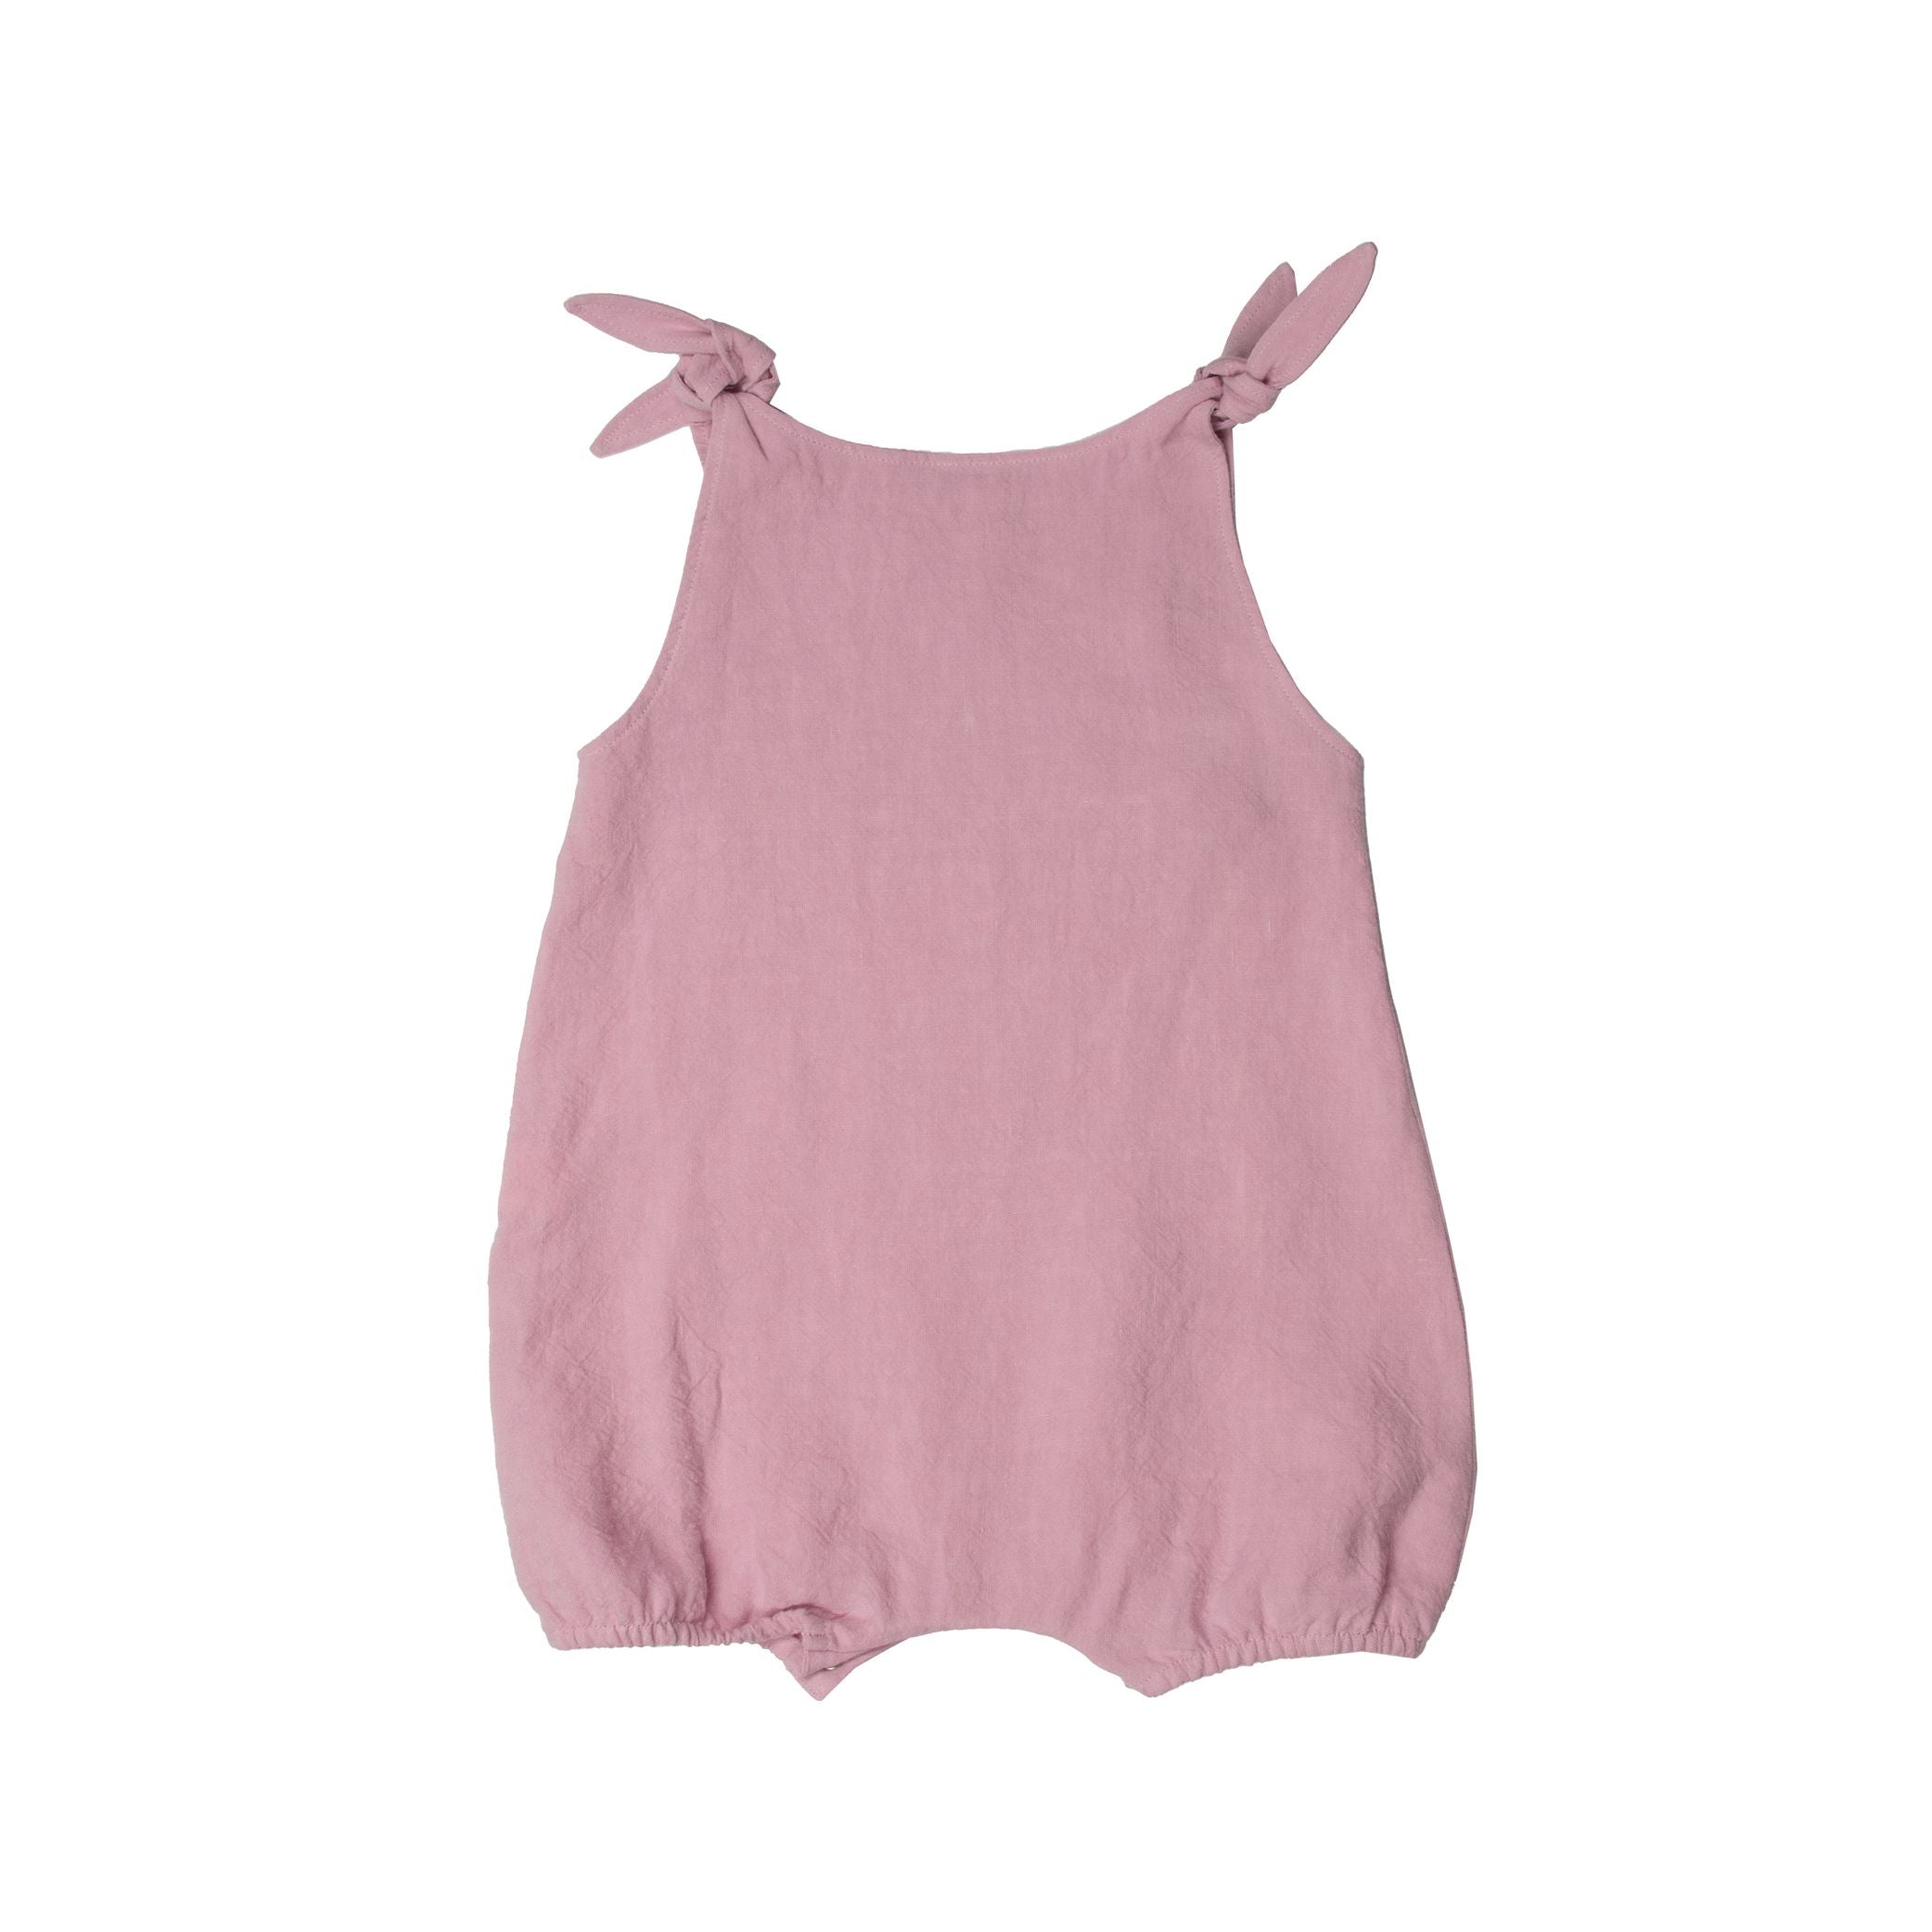 Lilac linen romper for baby girl. made in portugal. Suuky Porto certified products. Beautiful for a garden wedding. Baby inspired outfit for holiday in Florida, Boca Raton. Ships to Canada and United States of America, Duty Free. Organic, natural Materials. First Birthday Gift for baby girl. Sustainable luxury for baby & toddler.